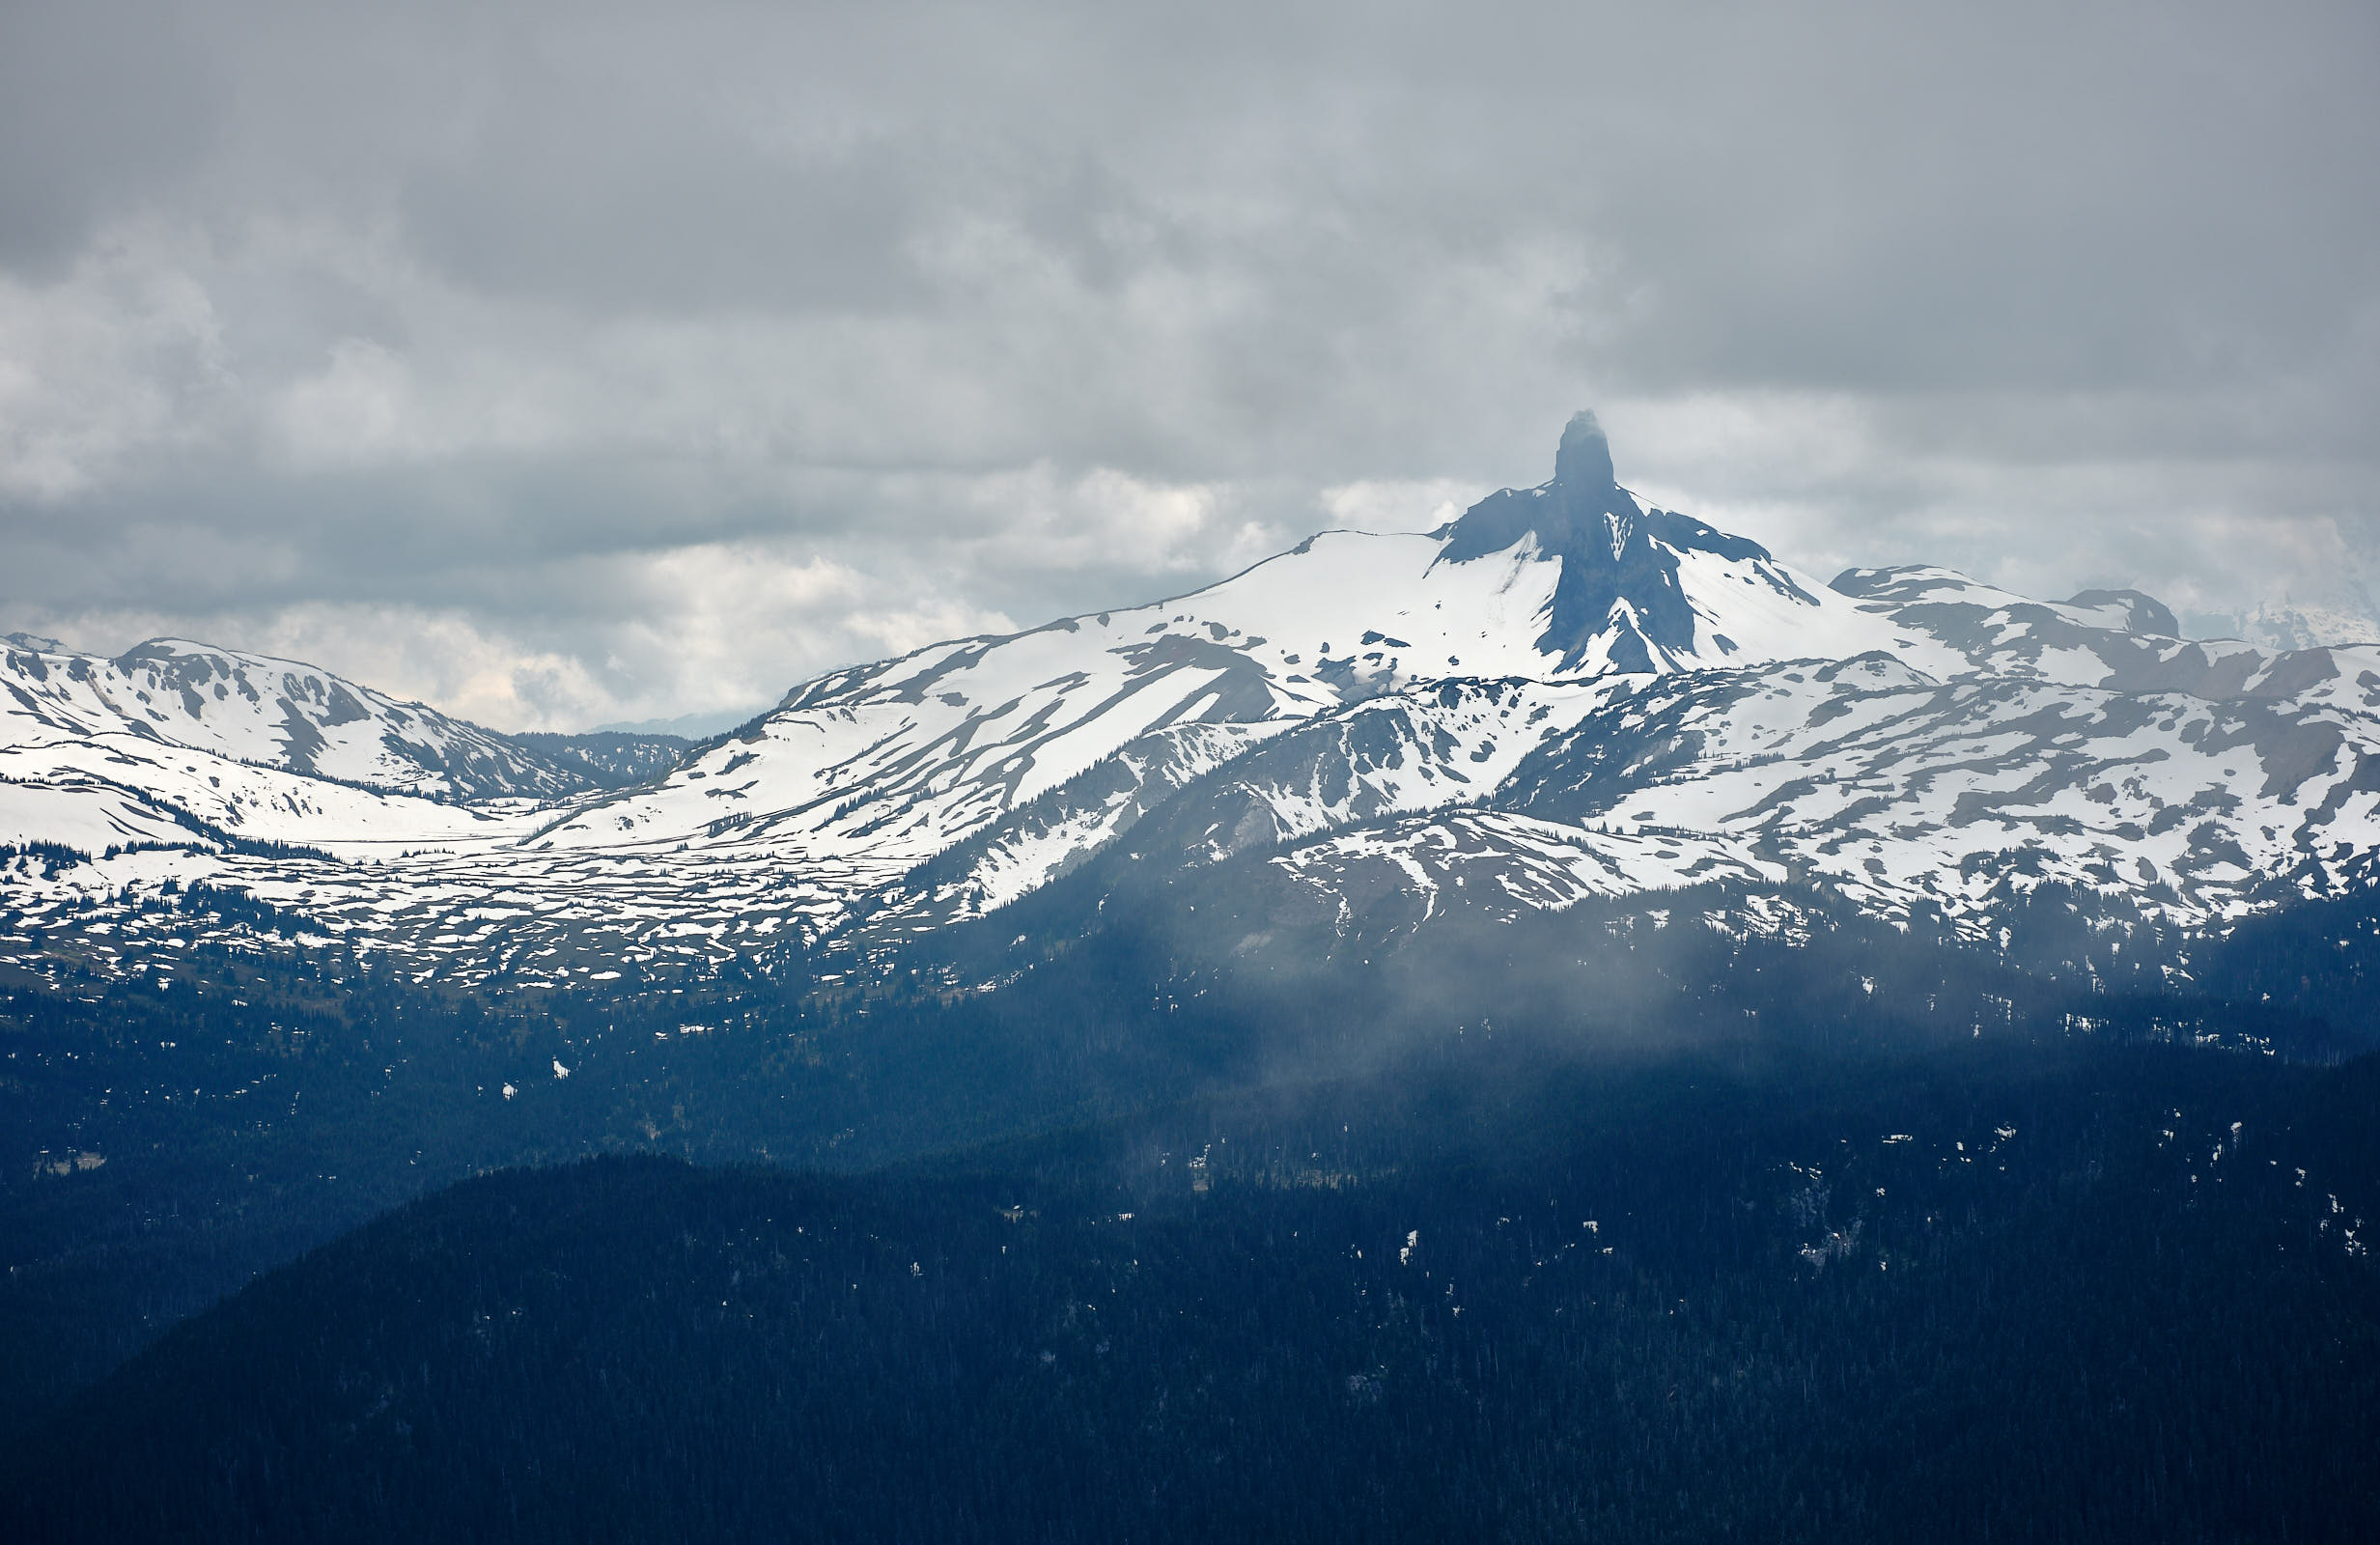 Black Tusk in the clouds, Whistler